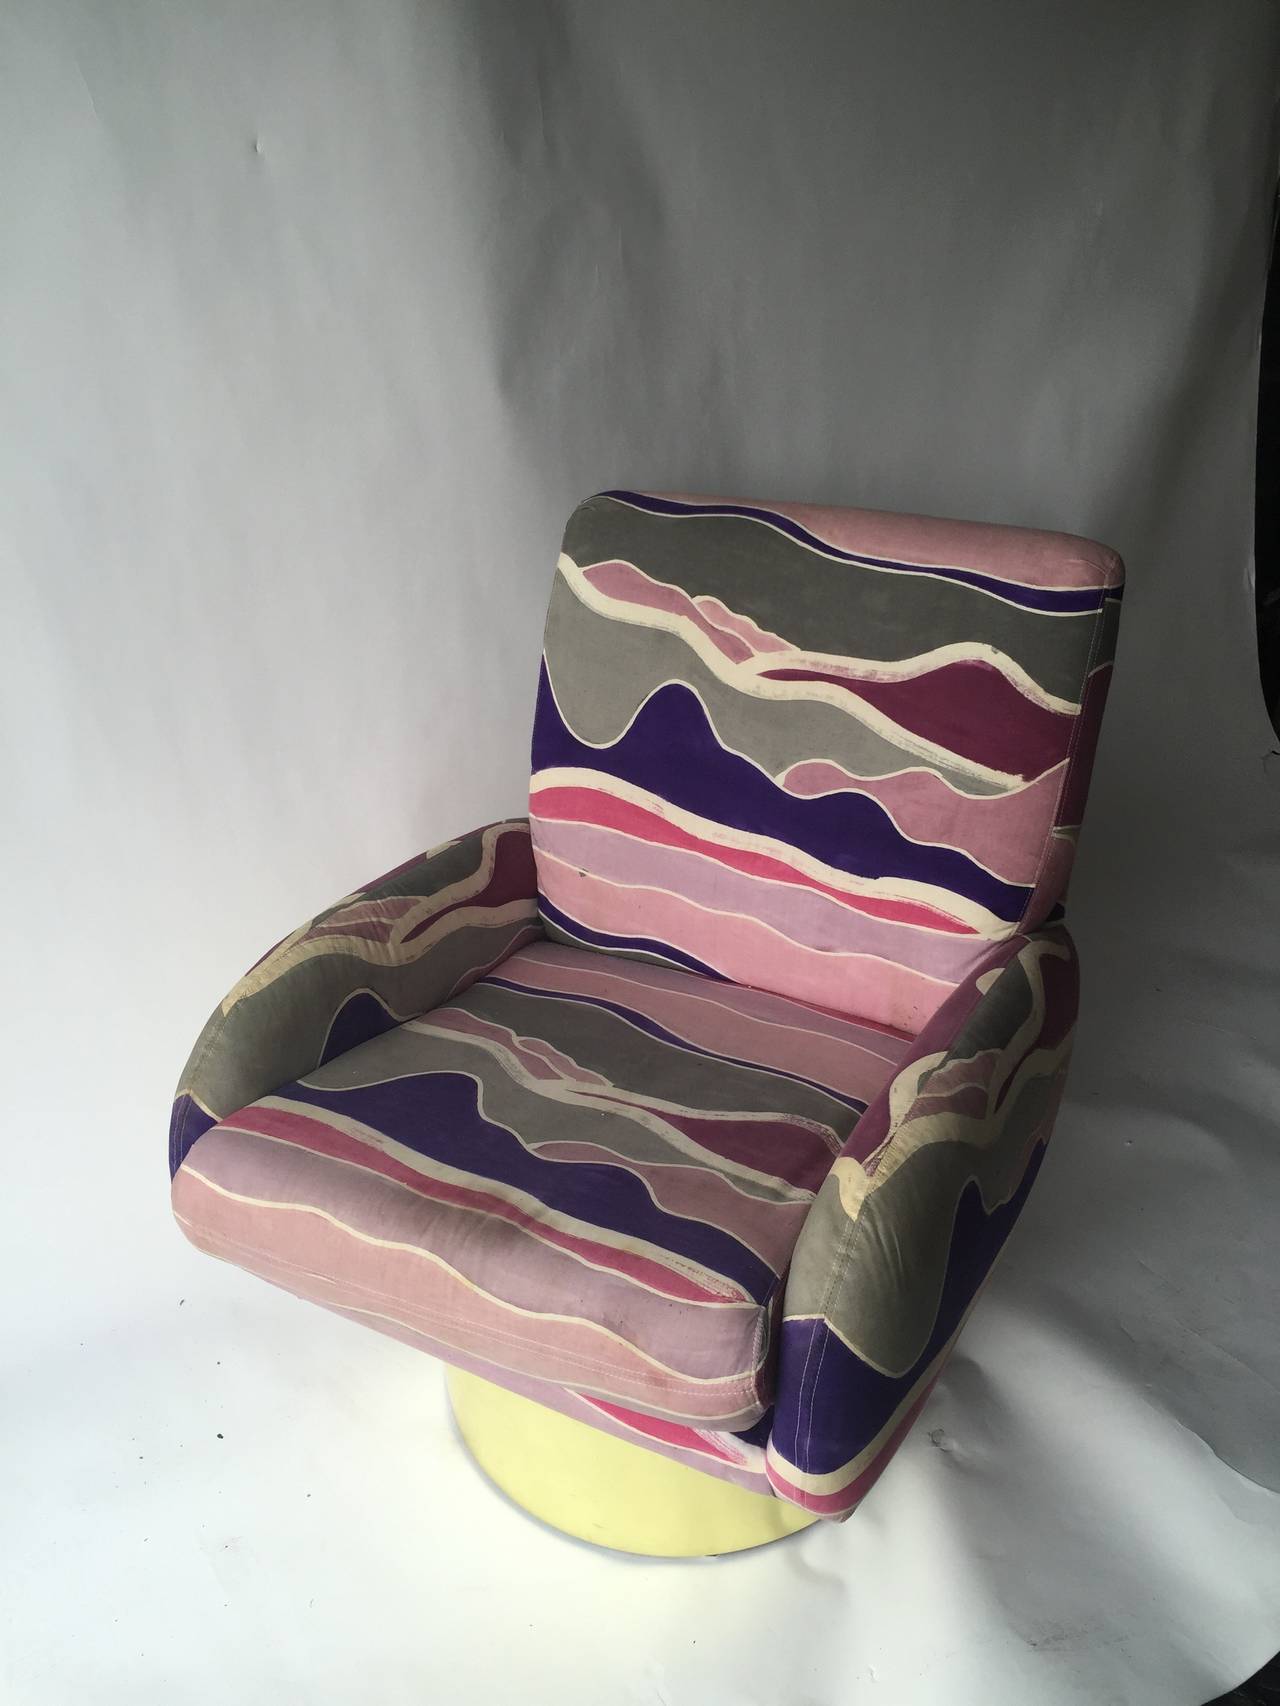 Great swivel chair designed by Milo Baughman with original colorful fabric
and round polished brass base designed,
circa 1970s.